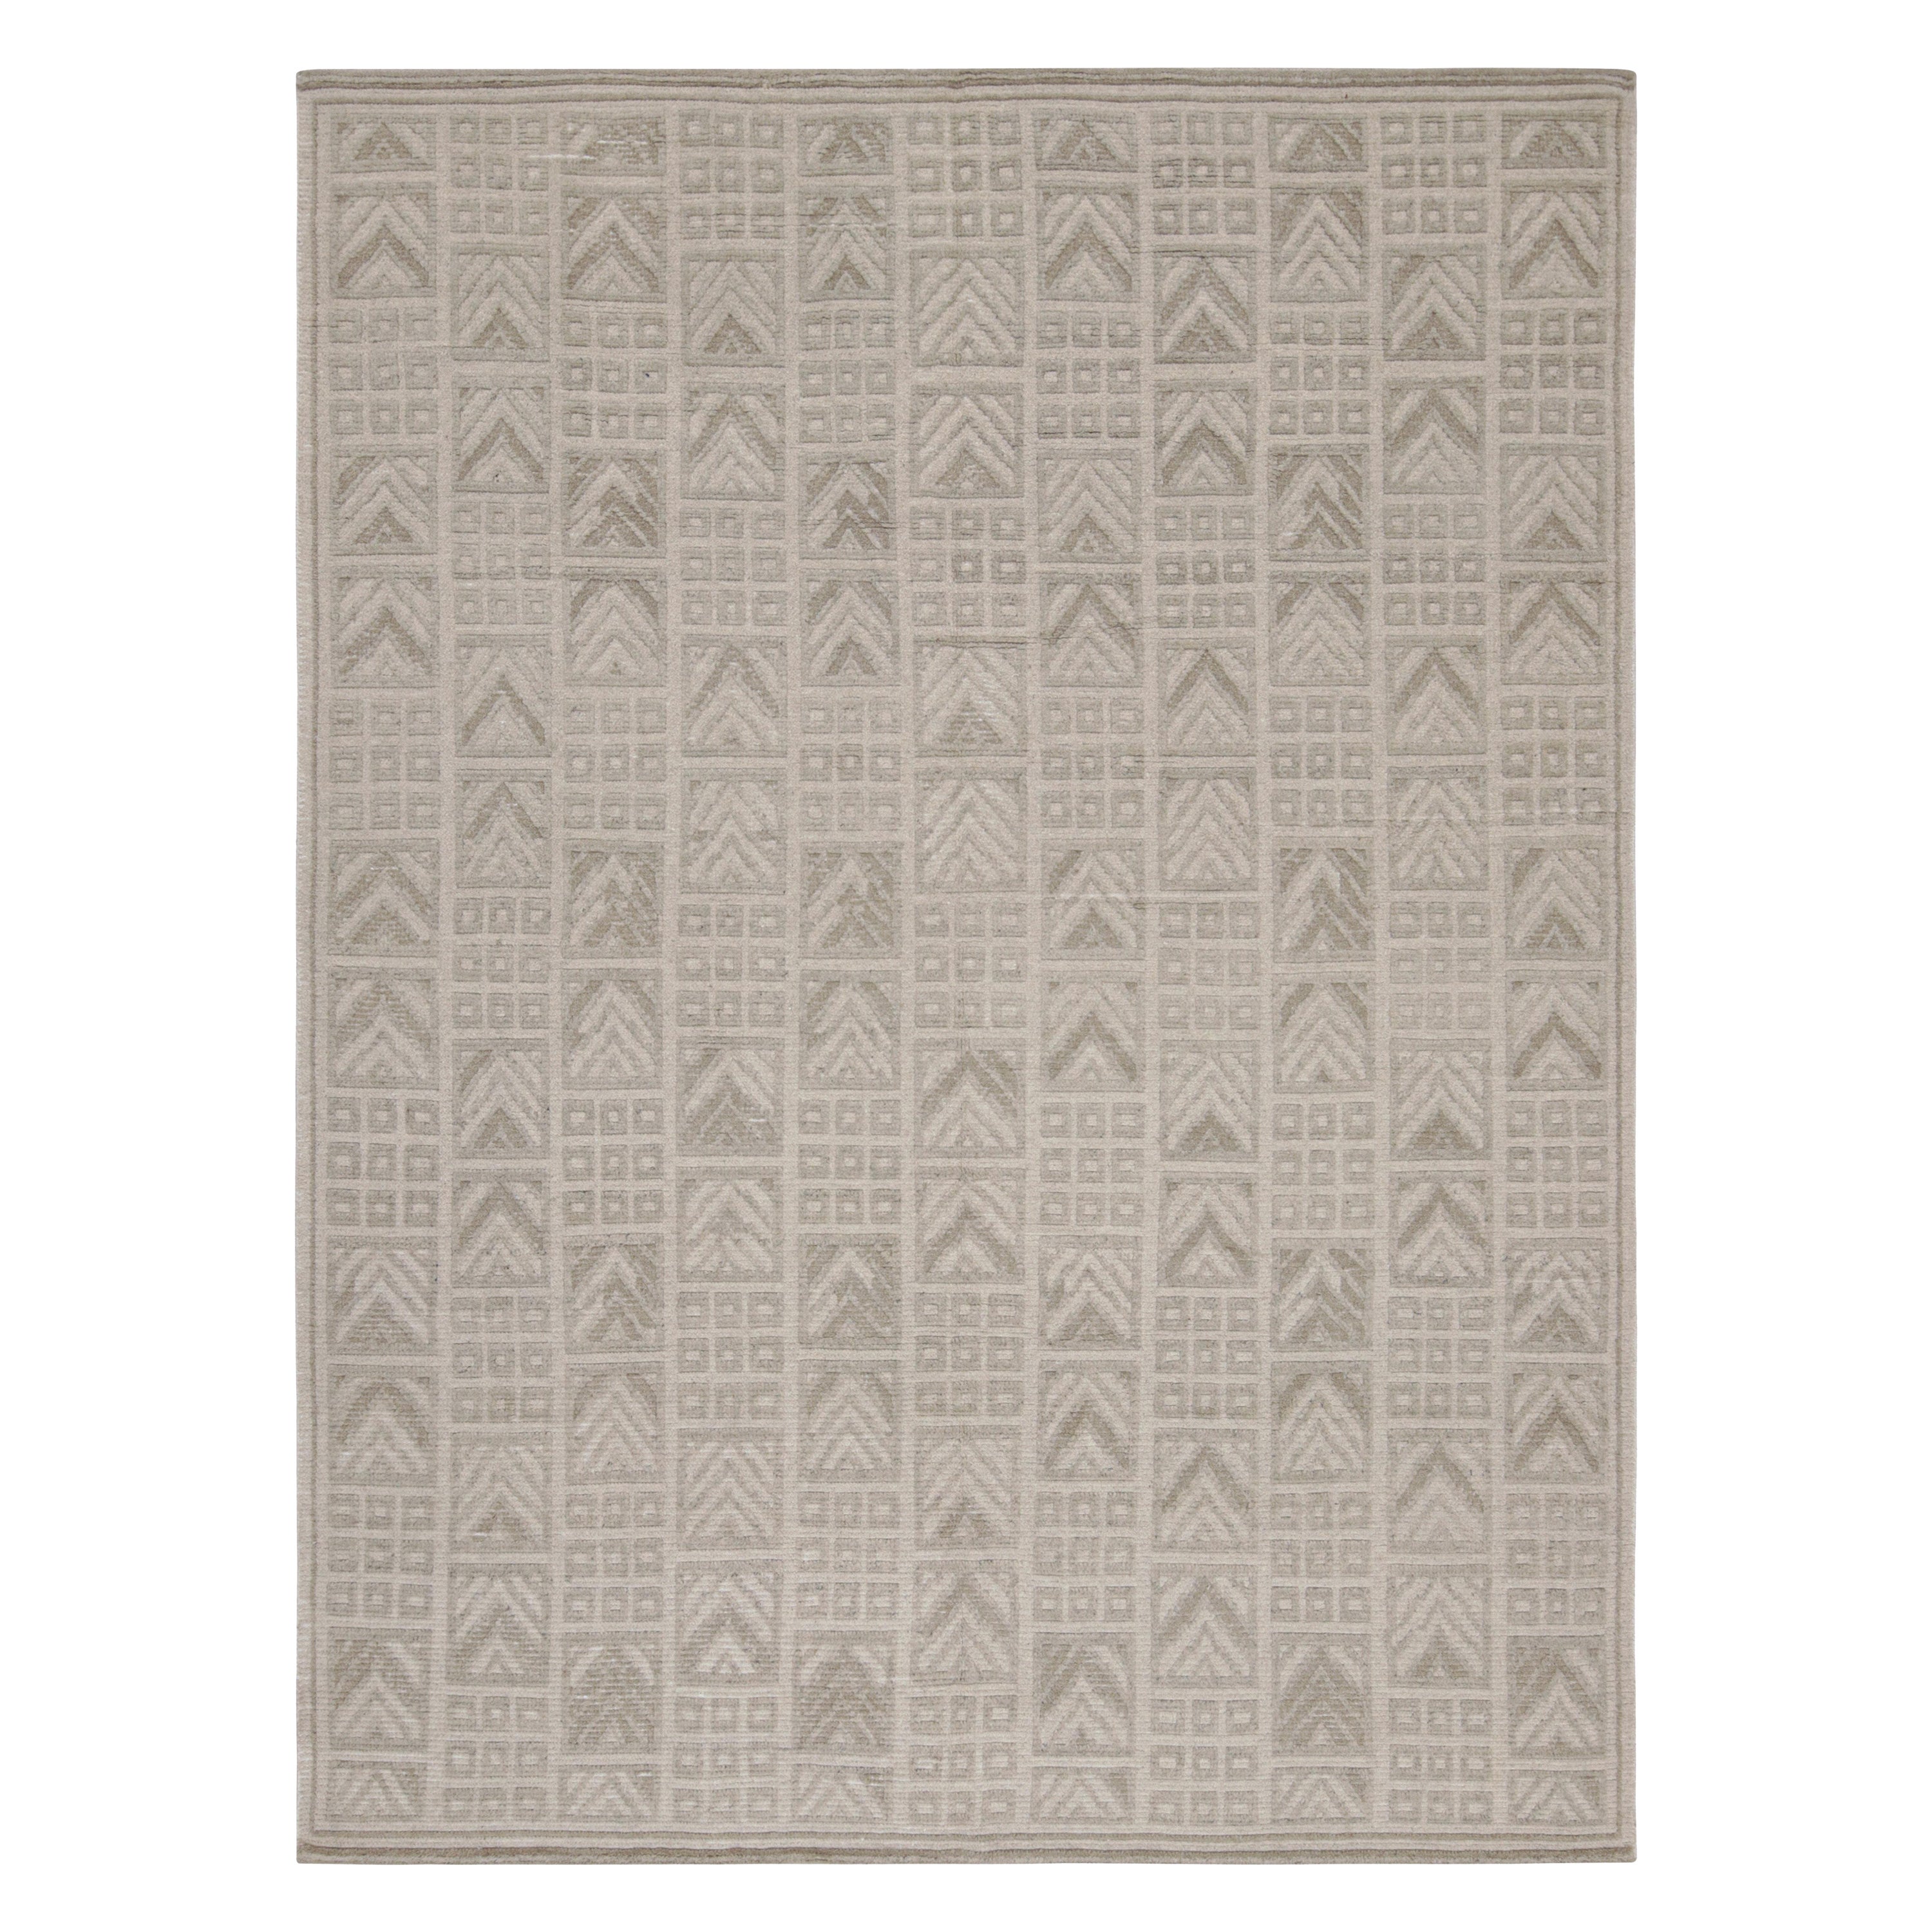 Rug & Kilim’s Scandinavian Style Rug with Beige and Gray Geometric Patterns For Sale